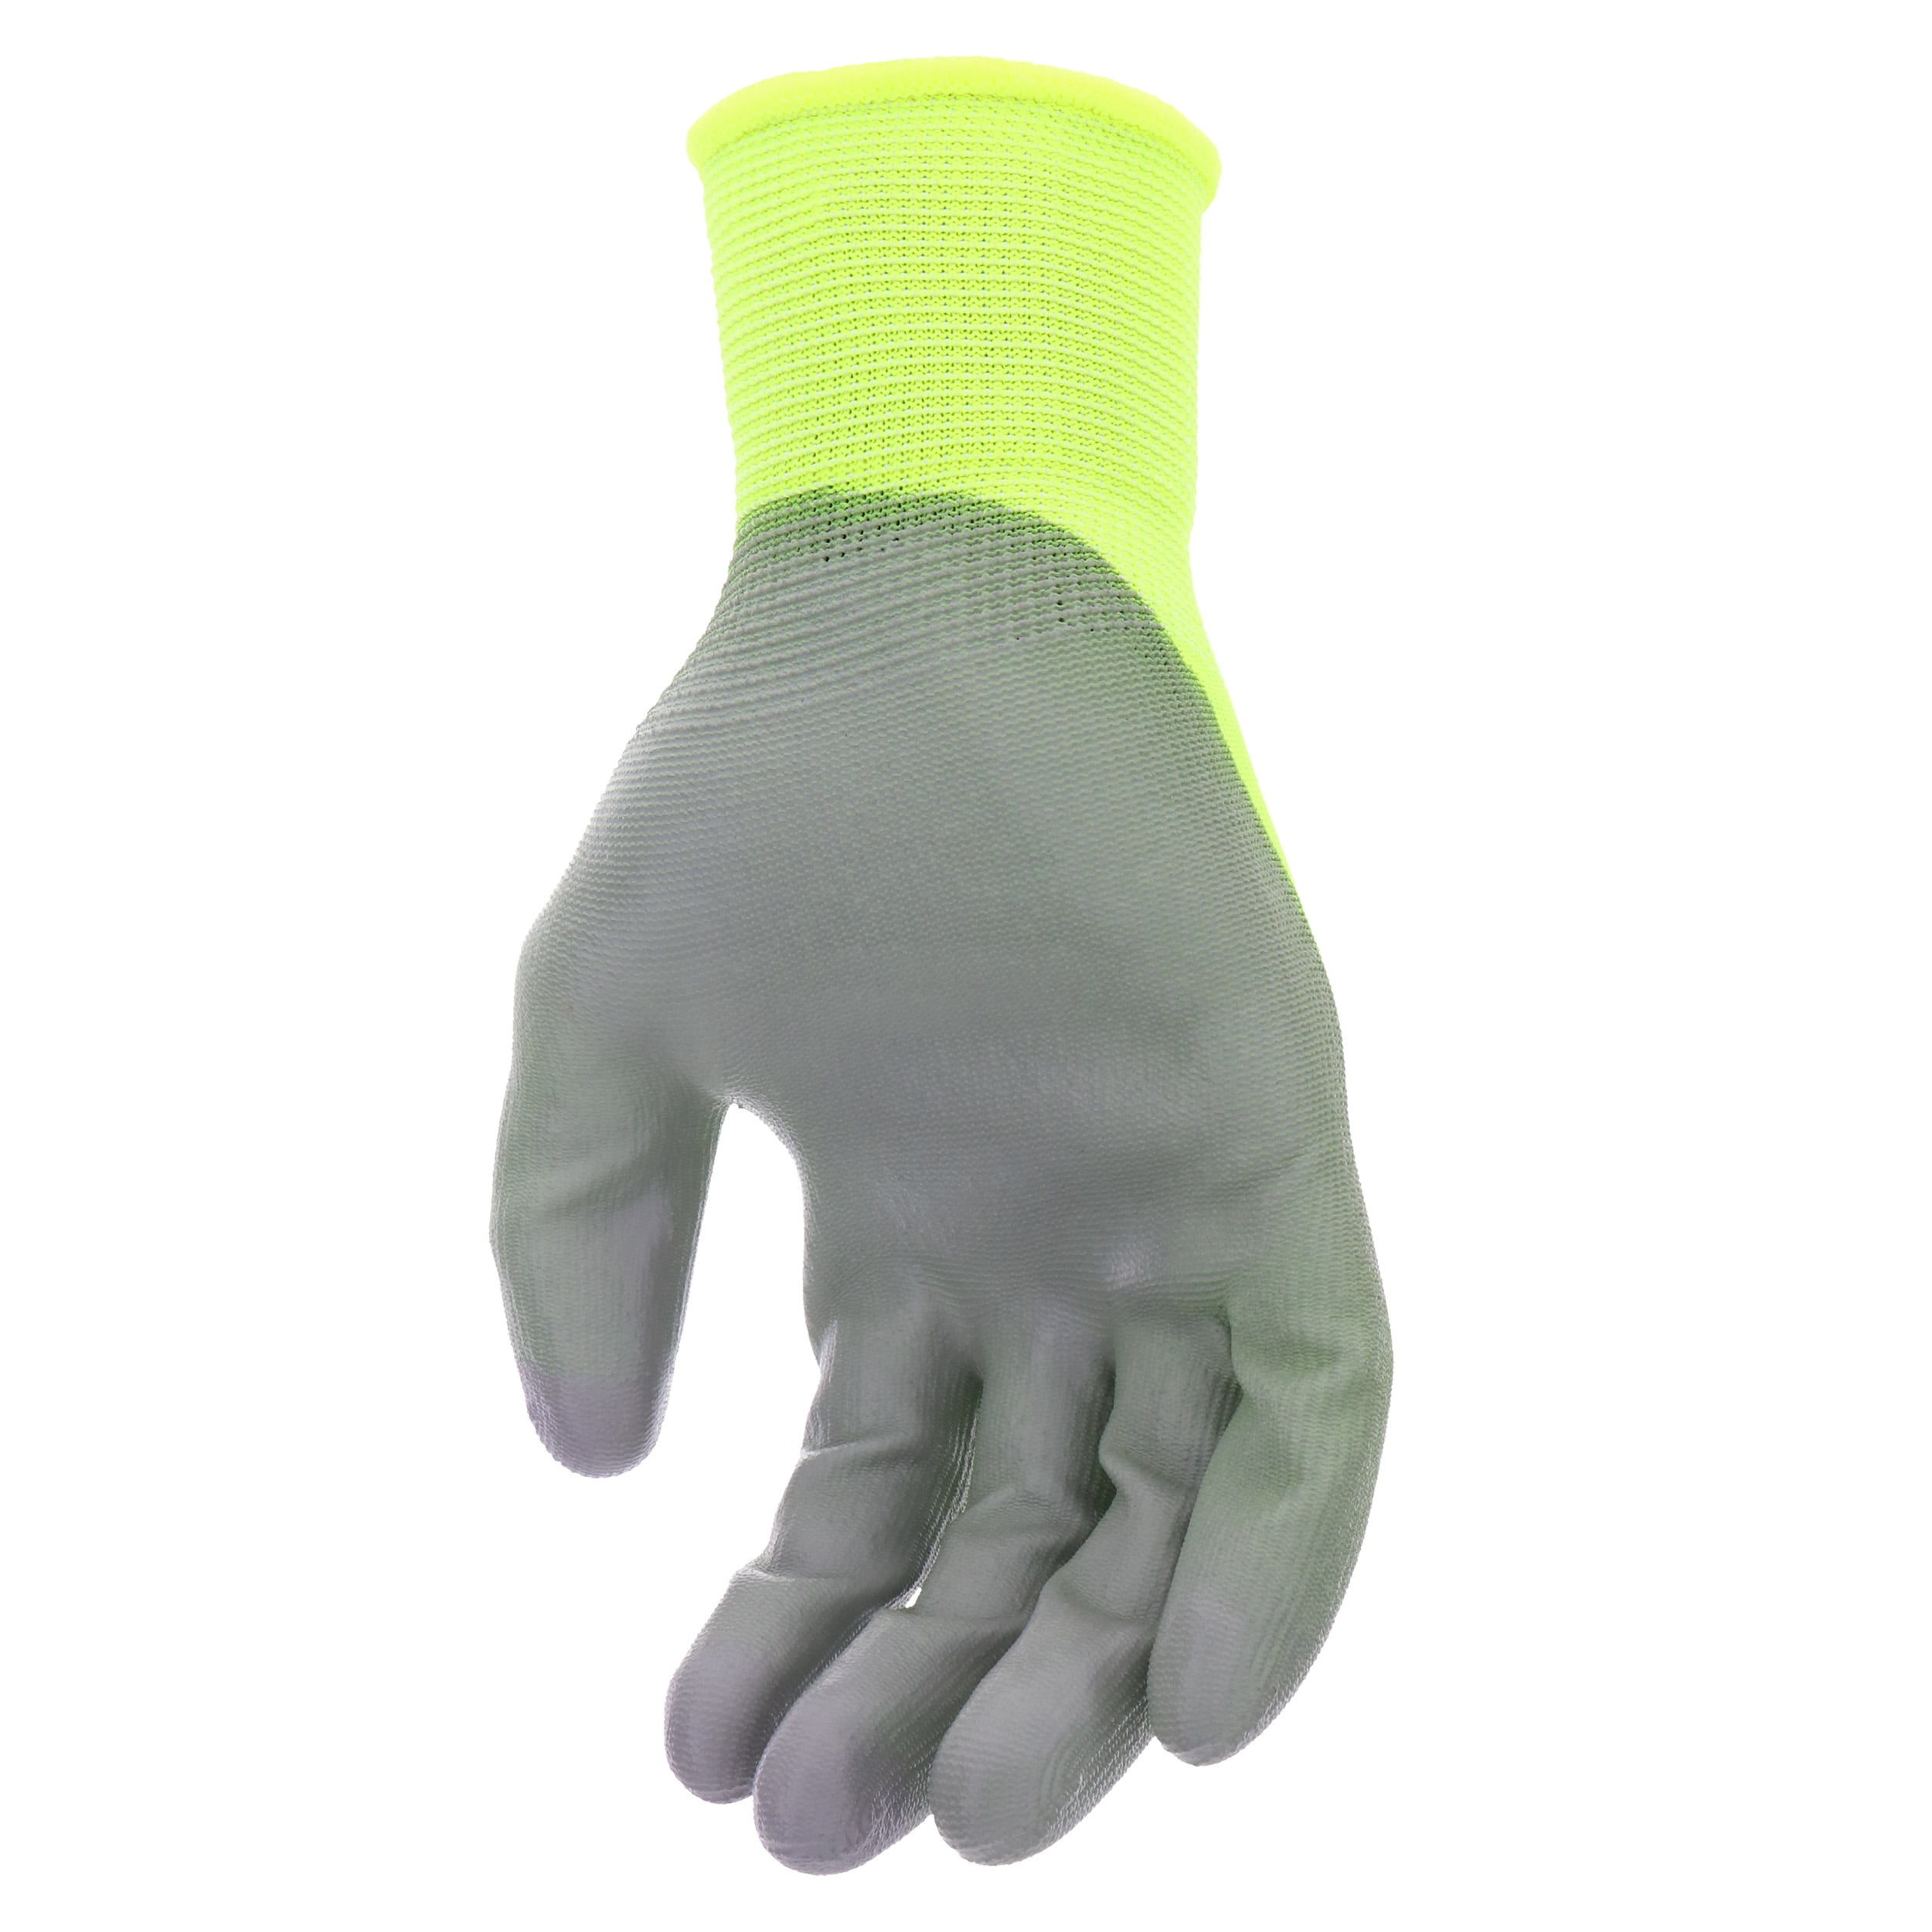 3* Firm Grip General Purpose Tough Working Gloves Touch Screen